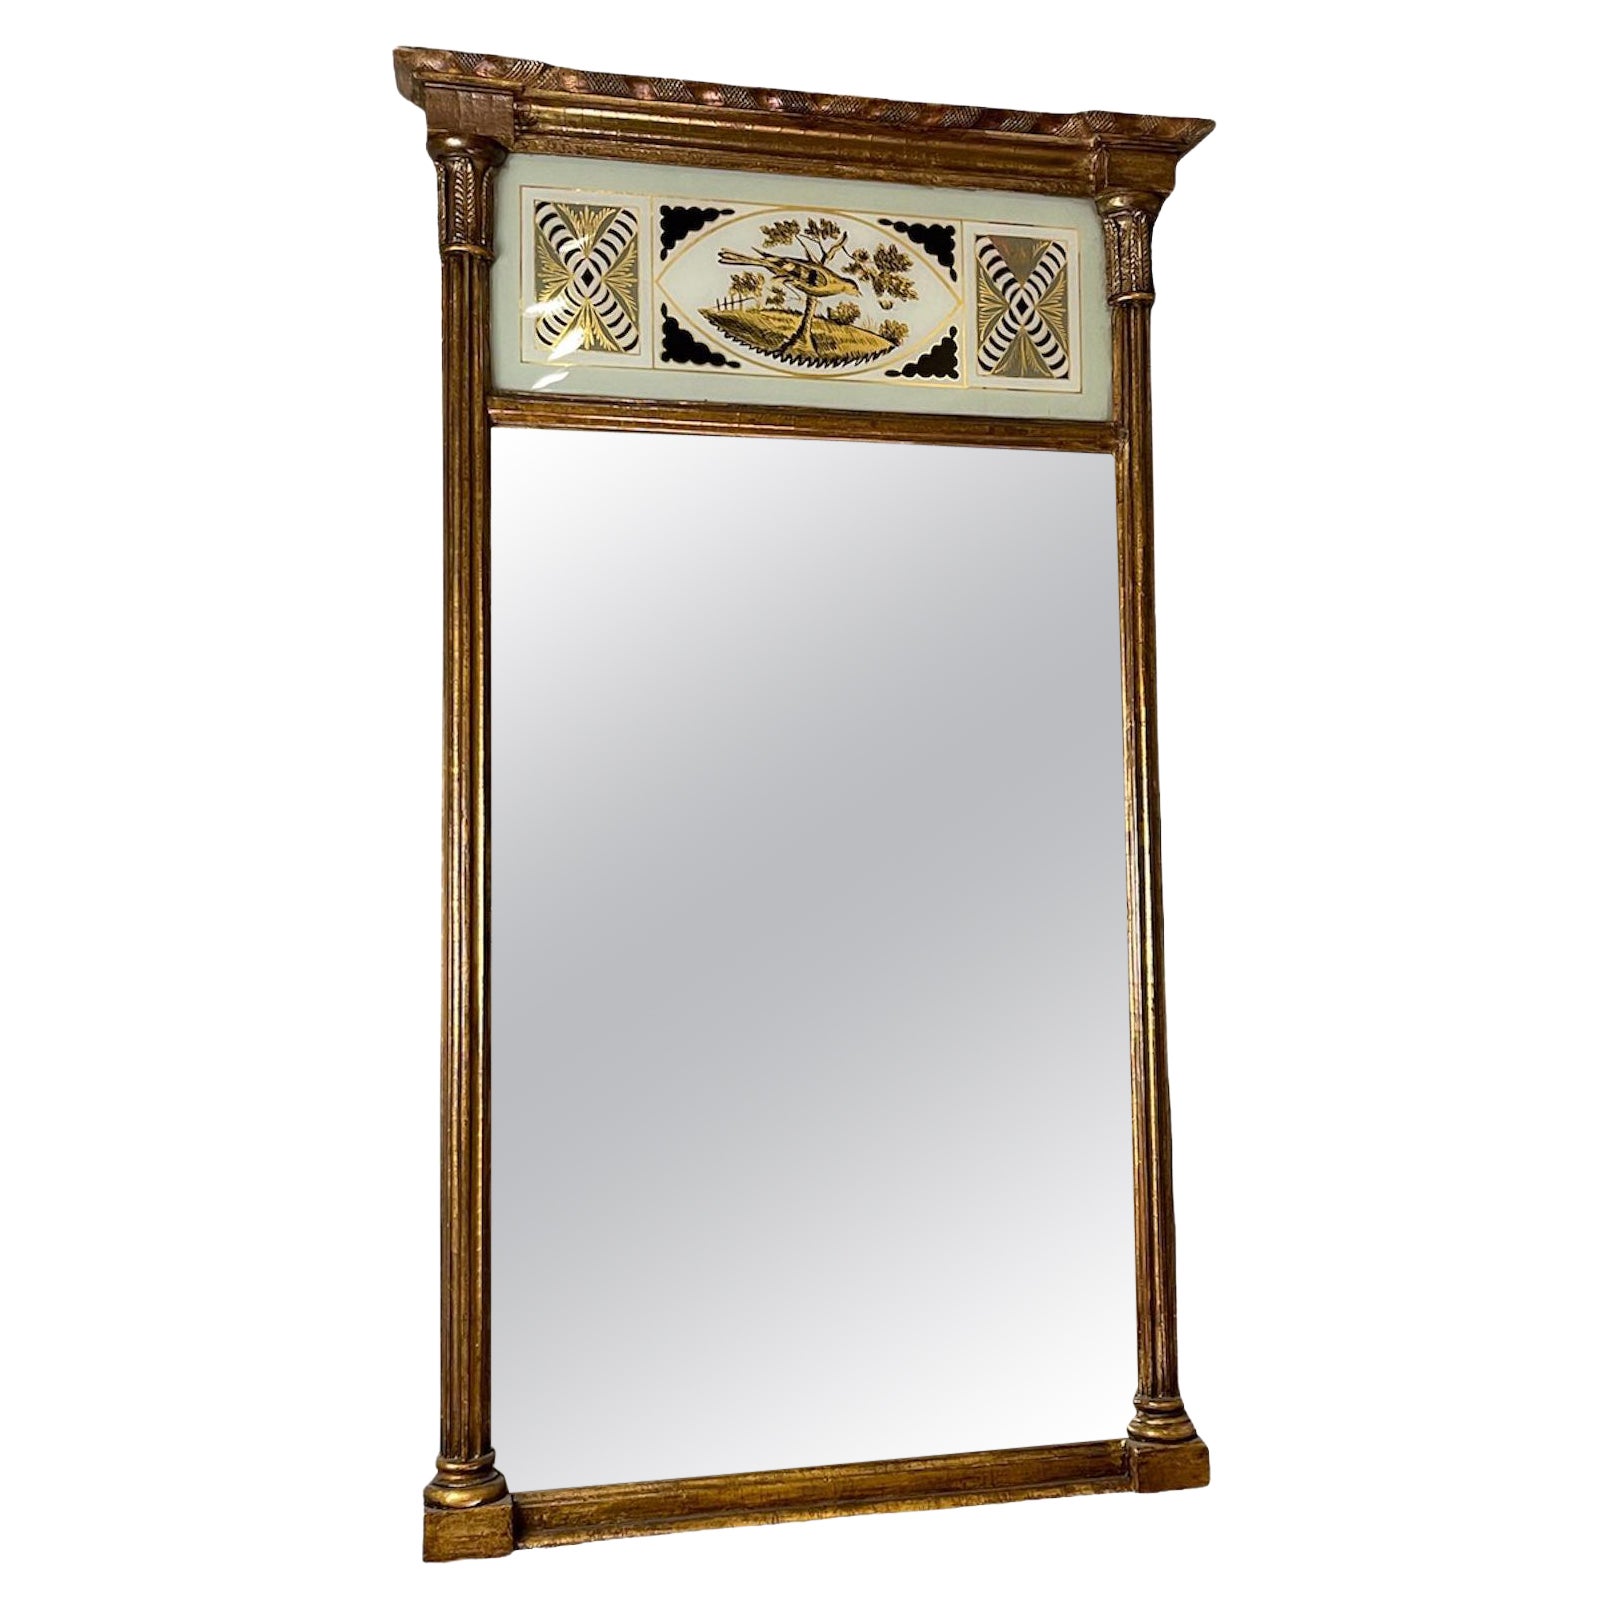 Federal Gilt-Wood & Eglomise Painted Mirror